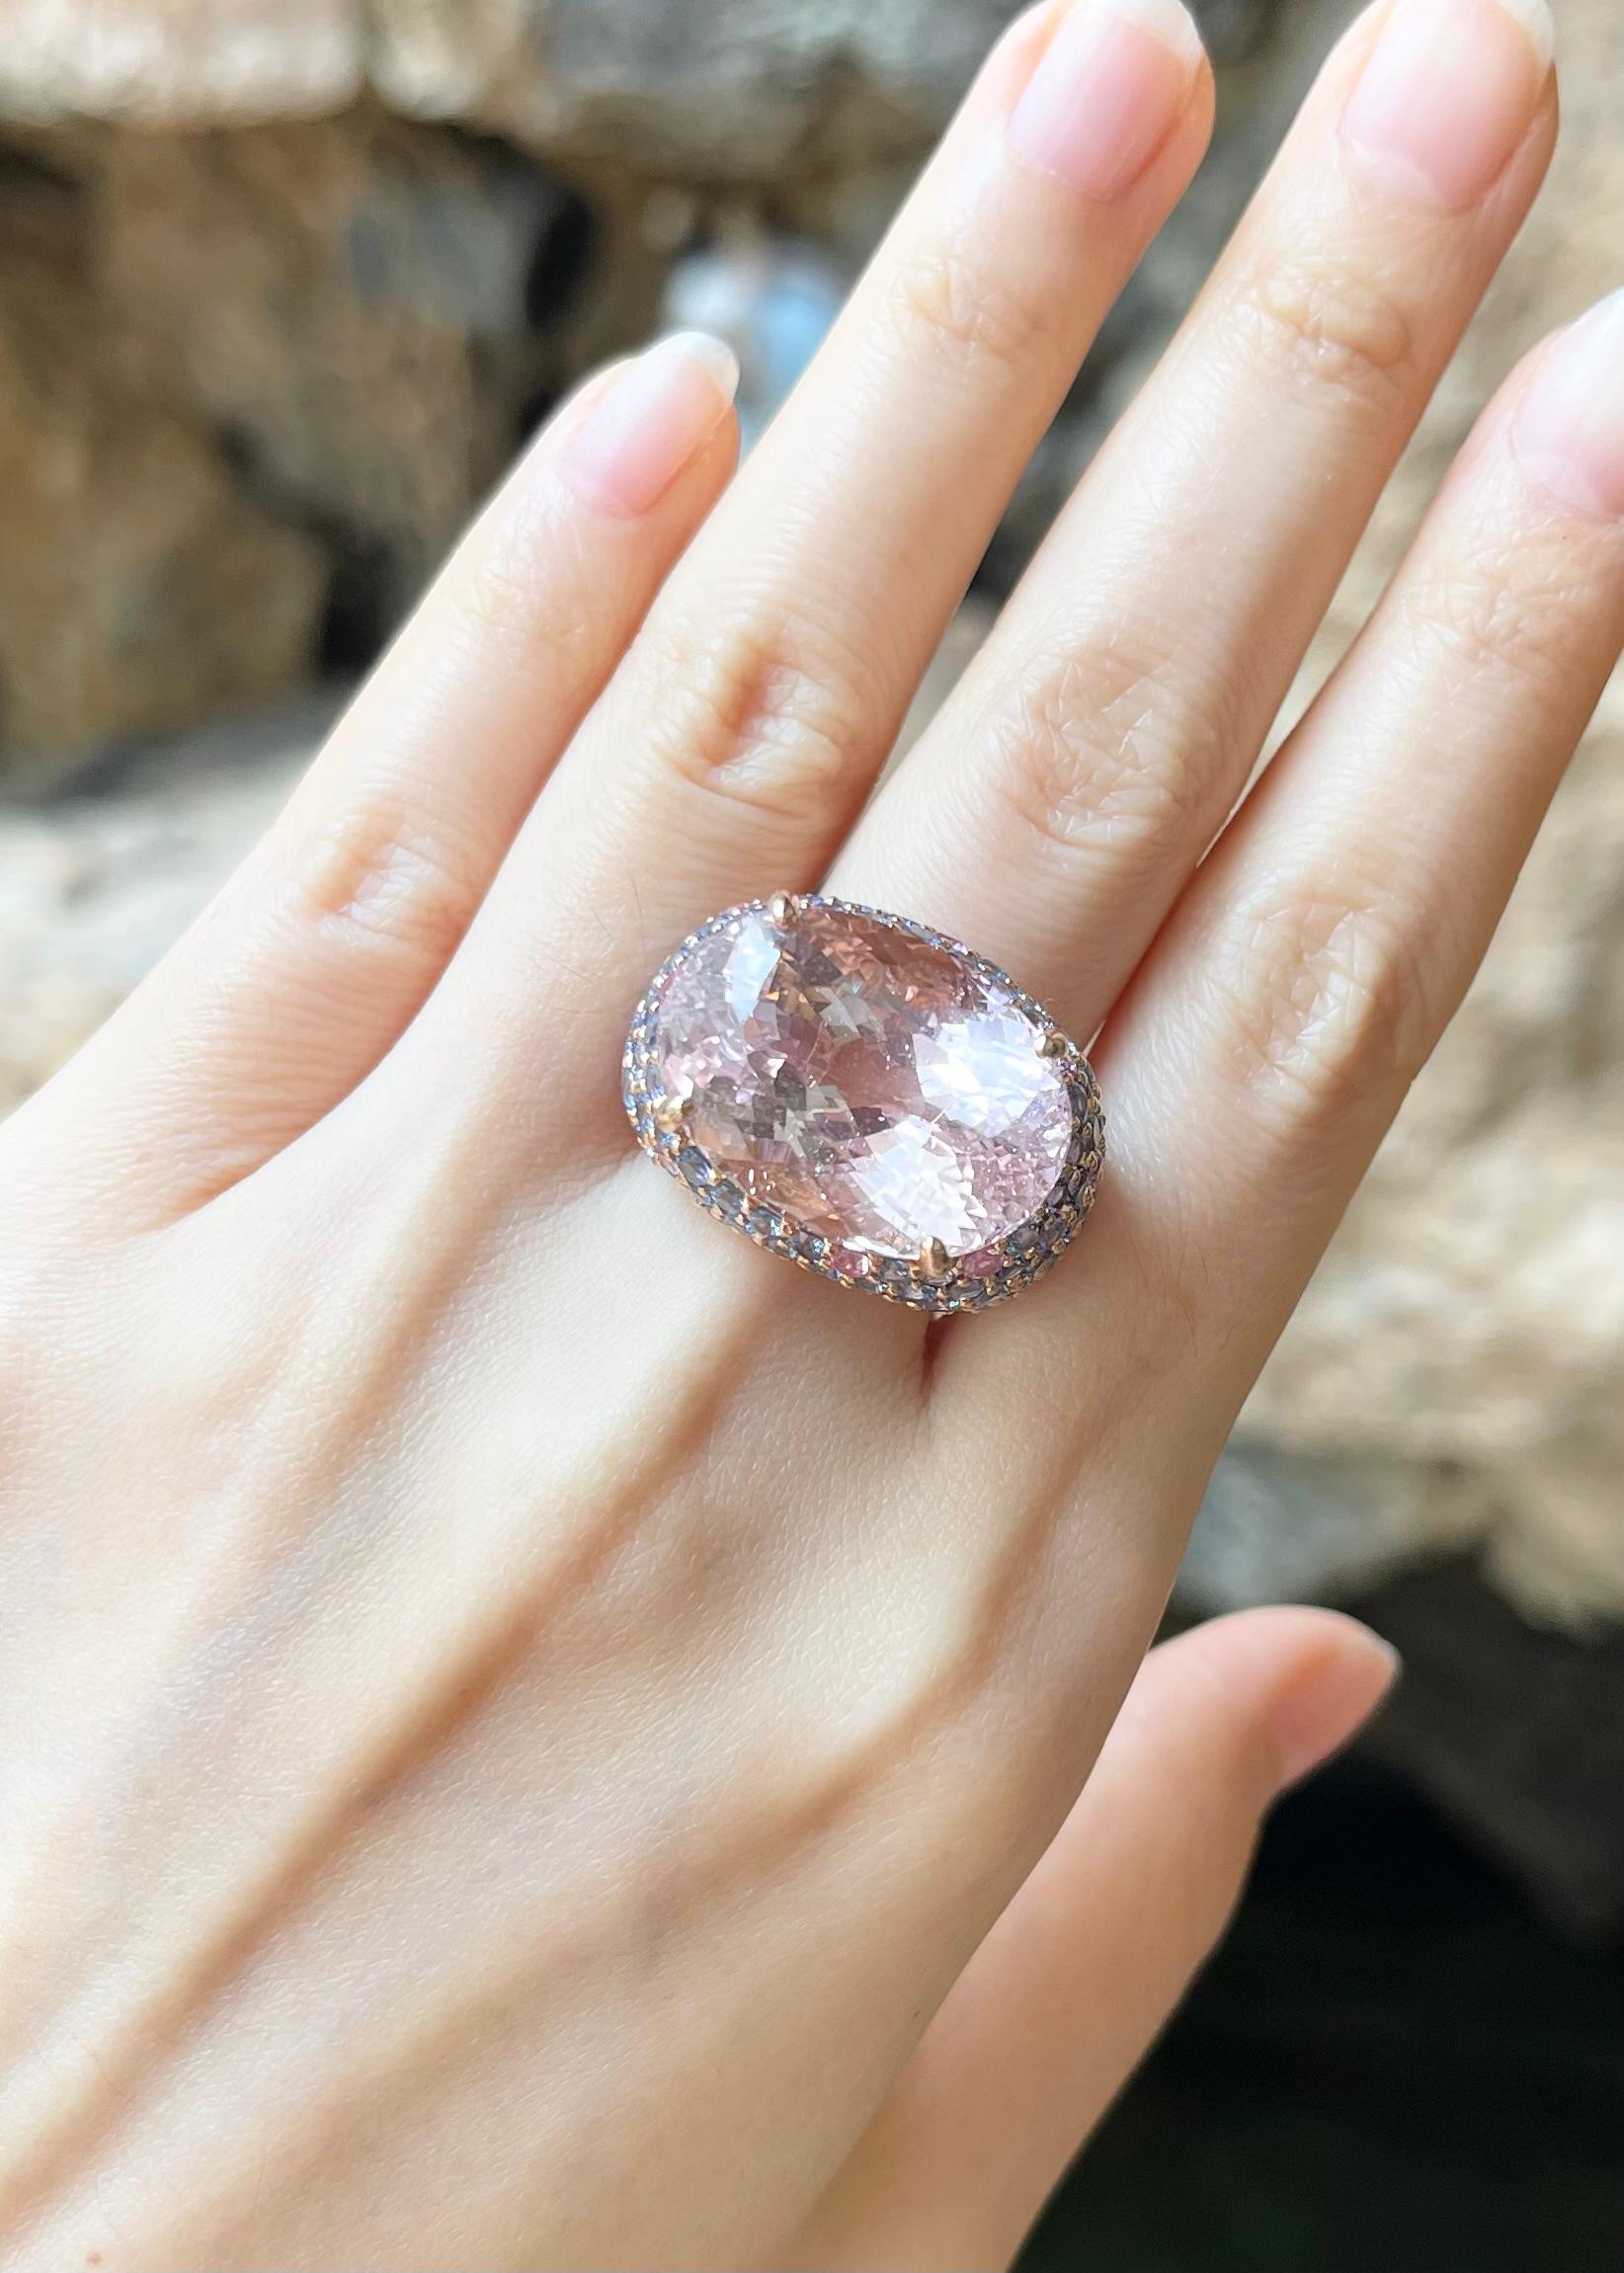 Morganite 26.32 carats with Pink Sapphire 1.02 carats and Blue Sapphire 7.05 carats Ring set in 18K Rose Gold Settings

Width:  2.2 cm 
Length: 1.6 cm
Ring Size: 56
Total Weight: 26.93 grams

